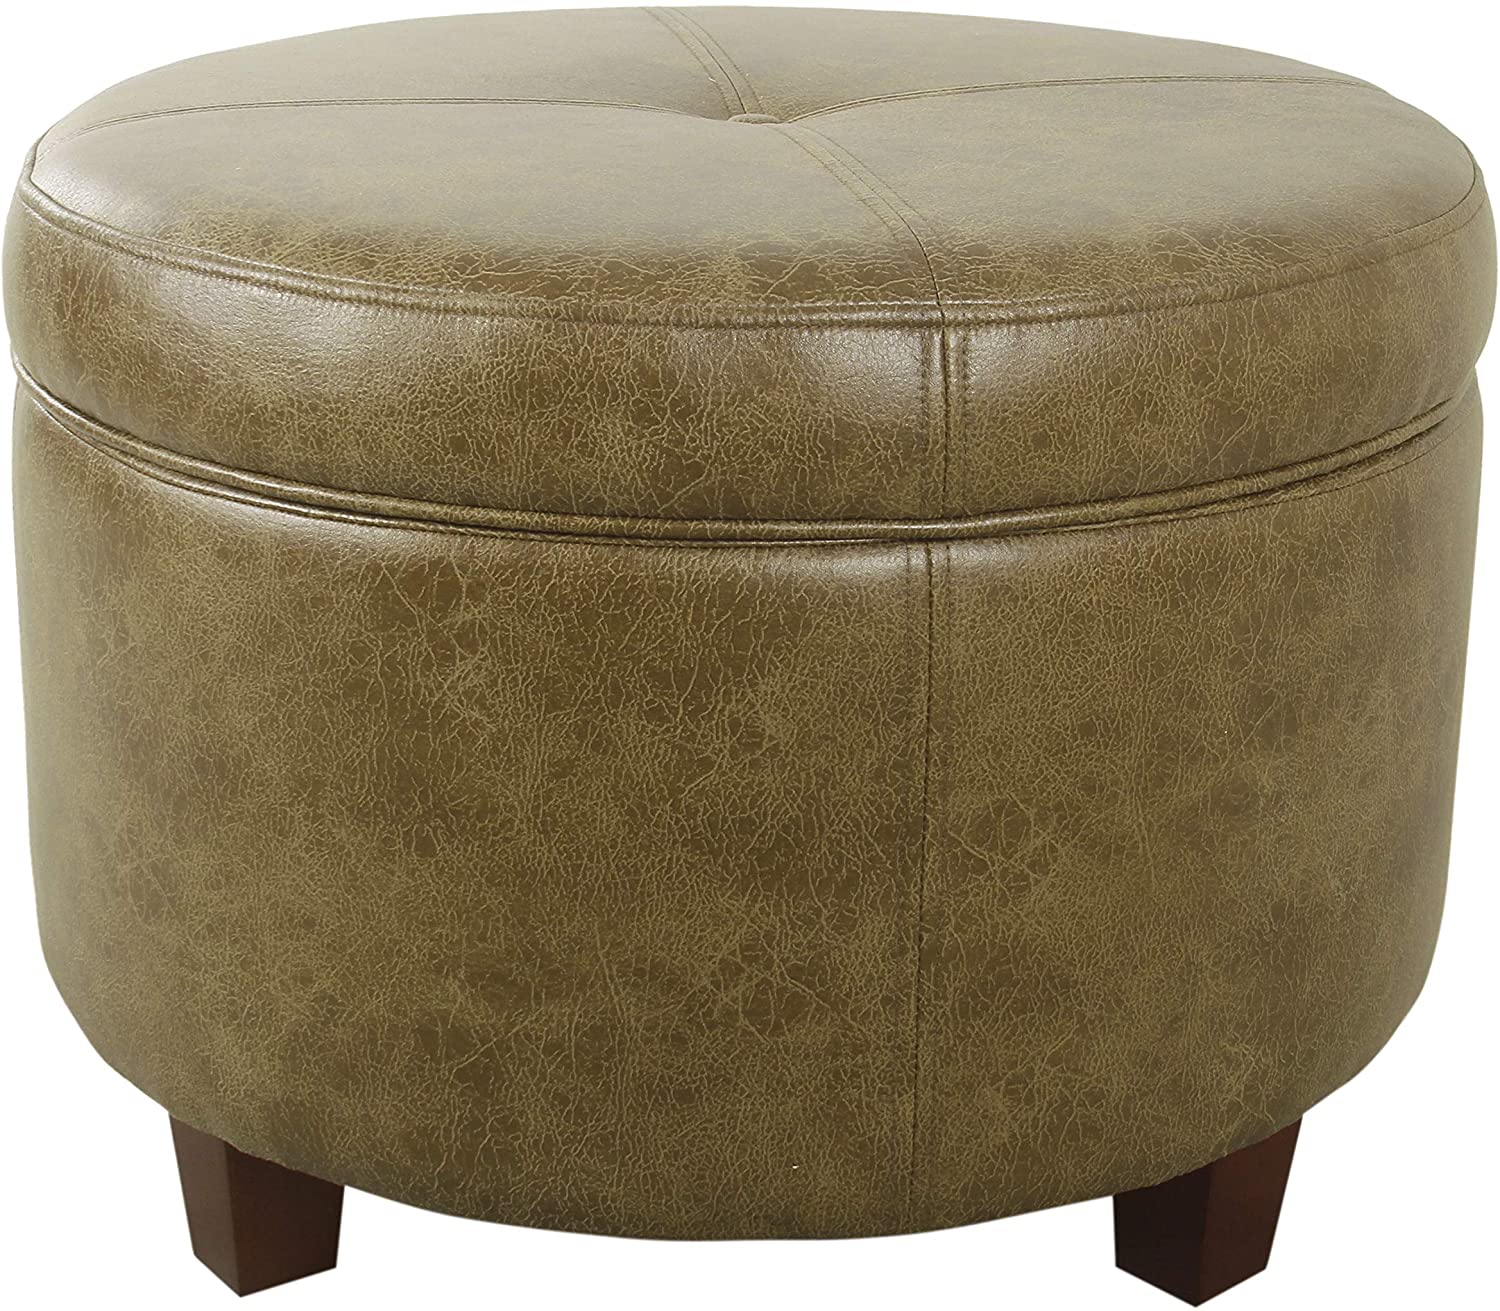 Ottomans : Large Leatherette Storage Ottoman - Distressed Brown Faux Leather-